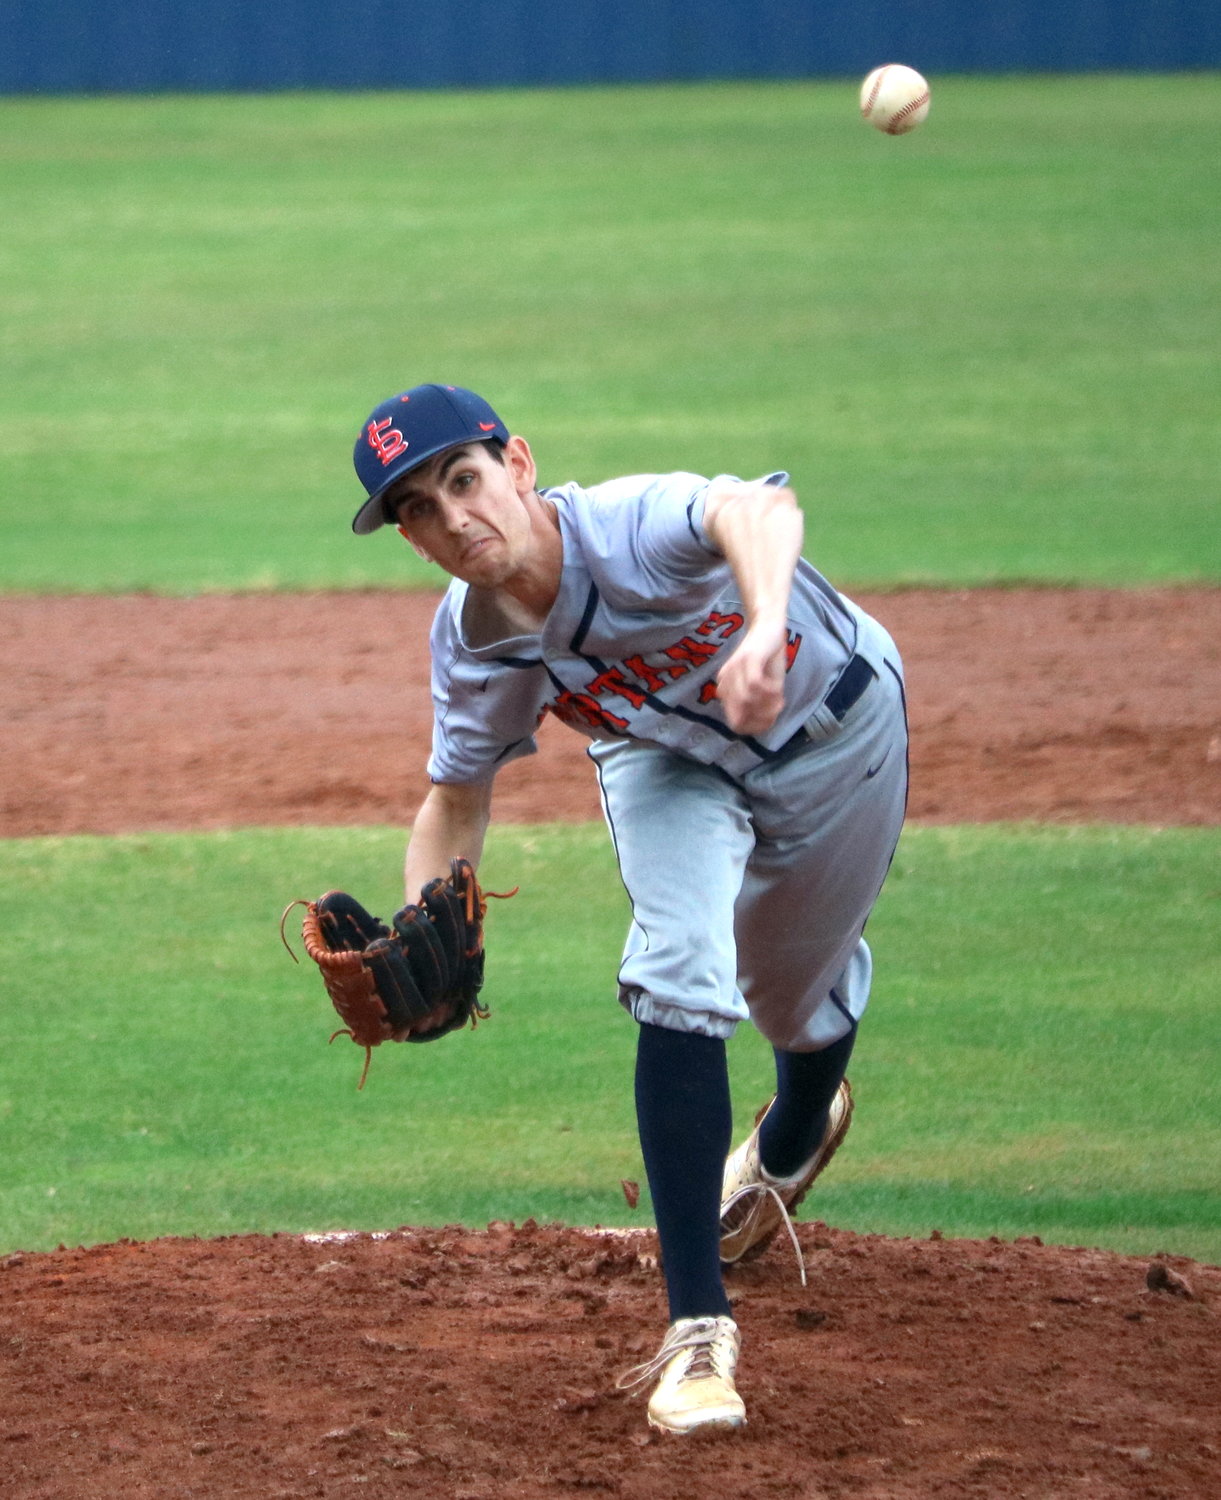 Michael Schwartz pitches during Thursday's game between Taylor and Seven Lakes at the Taylor baseball field.